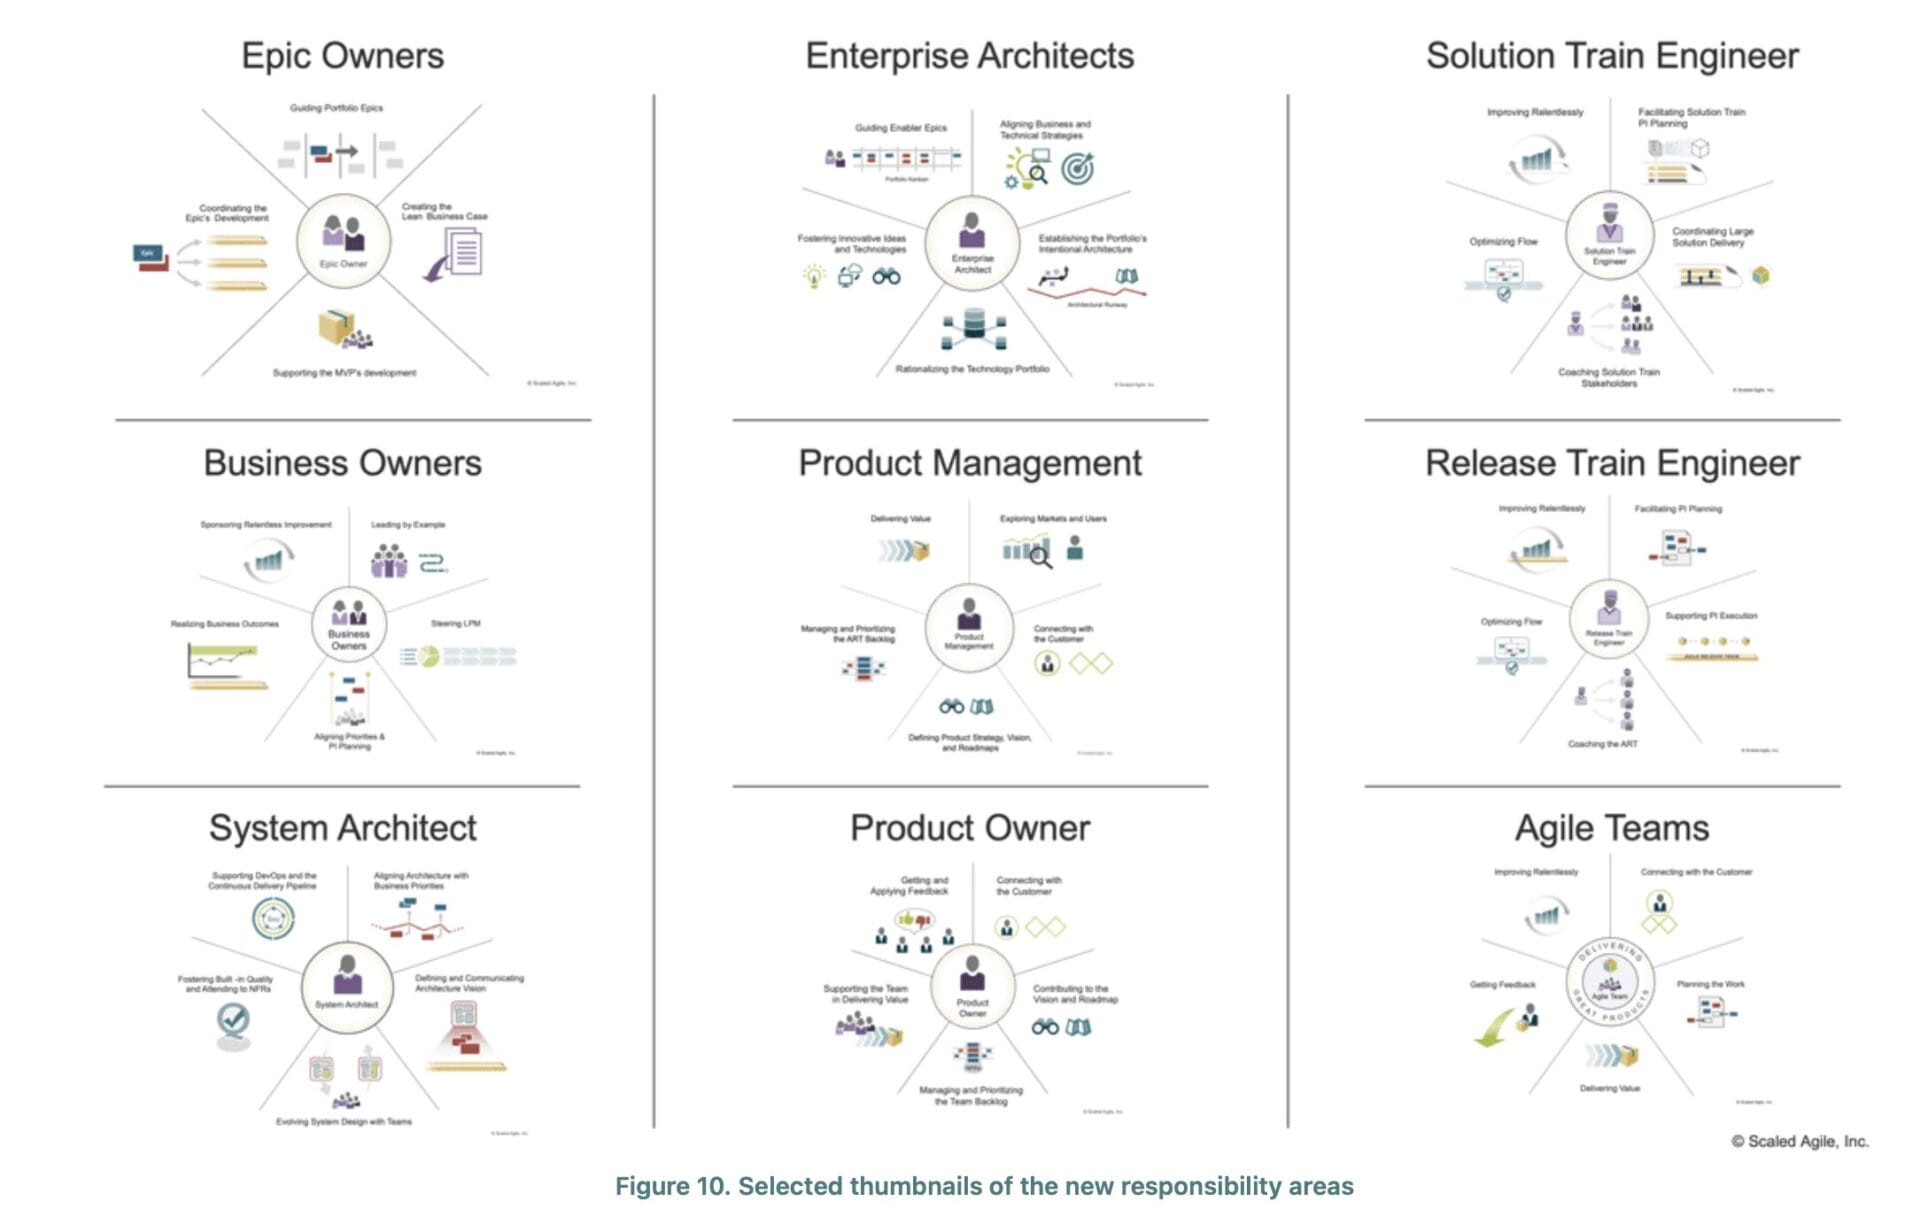 Revisions to the Solution Architect, RTE, and PO roles in SAFe 6.0. This image outlines the modifications and elucidations applied to these pivotal roles, amplifying their influence within the agile framework.